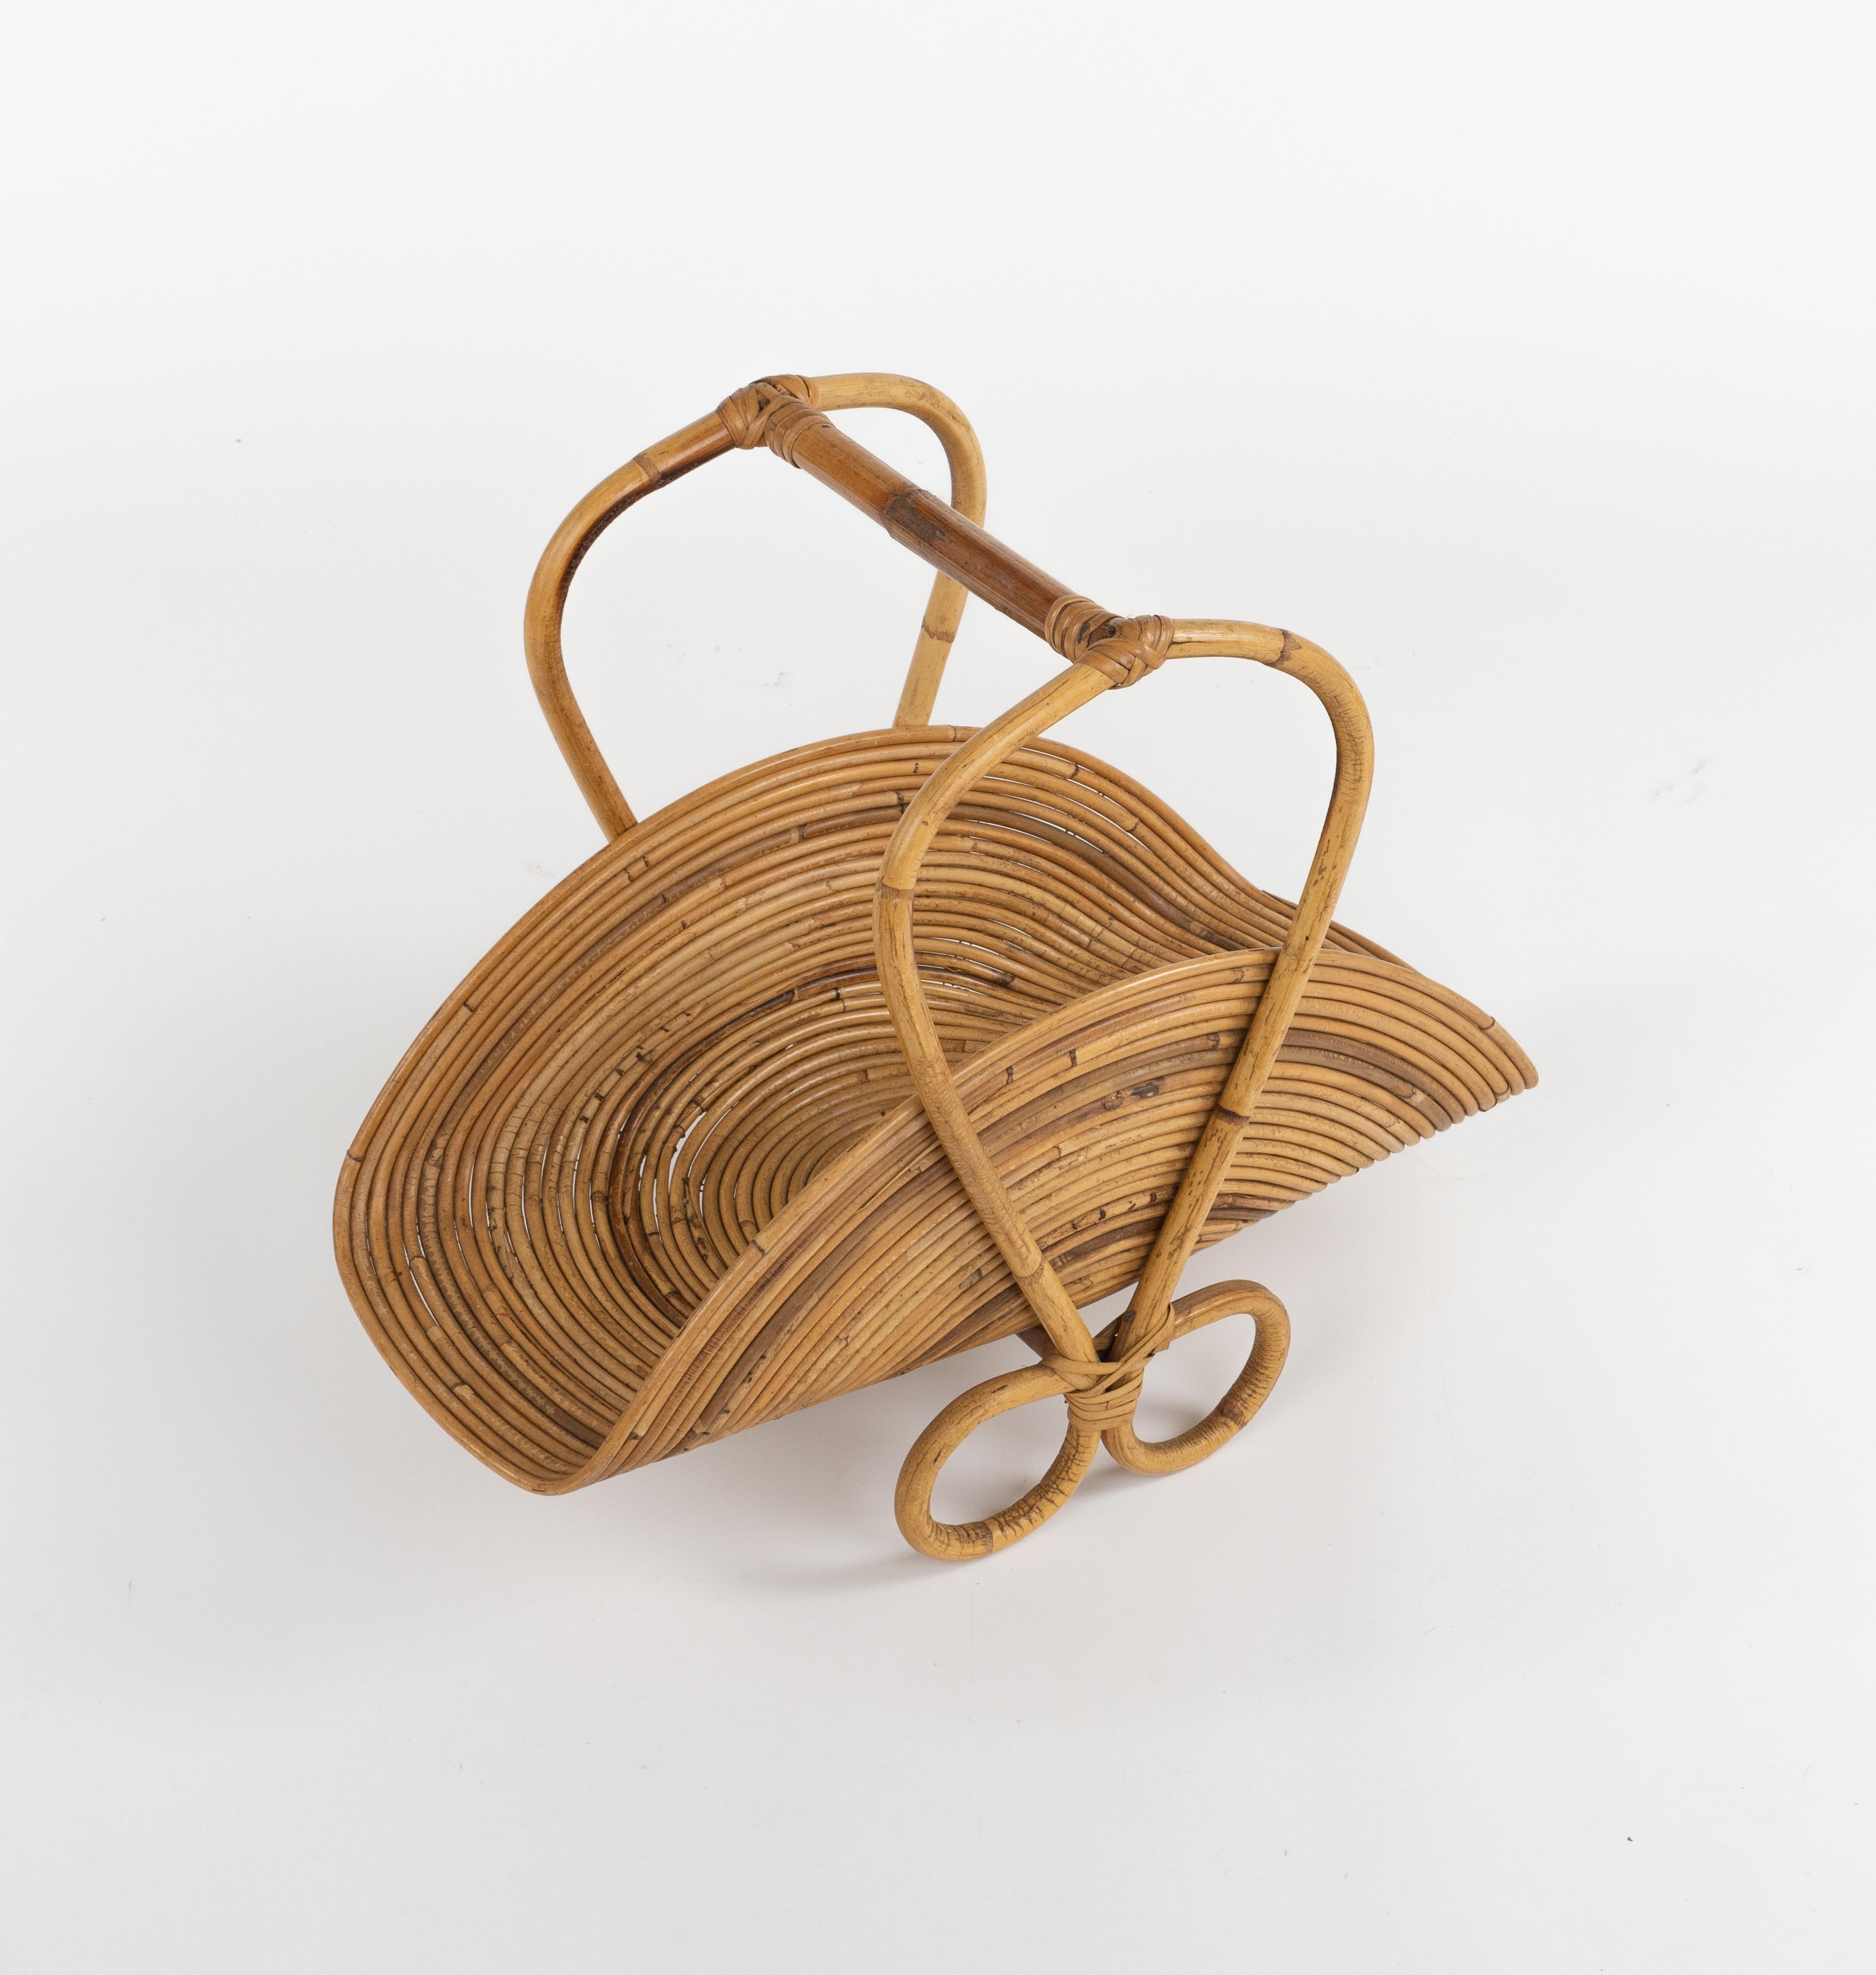 Mid-Century Modern Midcentury Bamboo and Rattan Magazine Rack Vivai Del Sud Style, Italy 1960s For Sale